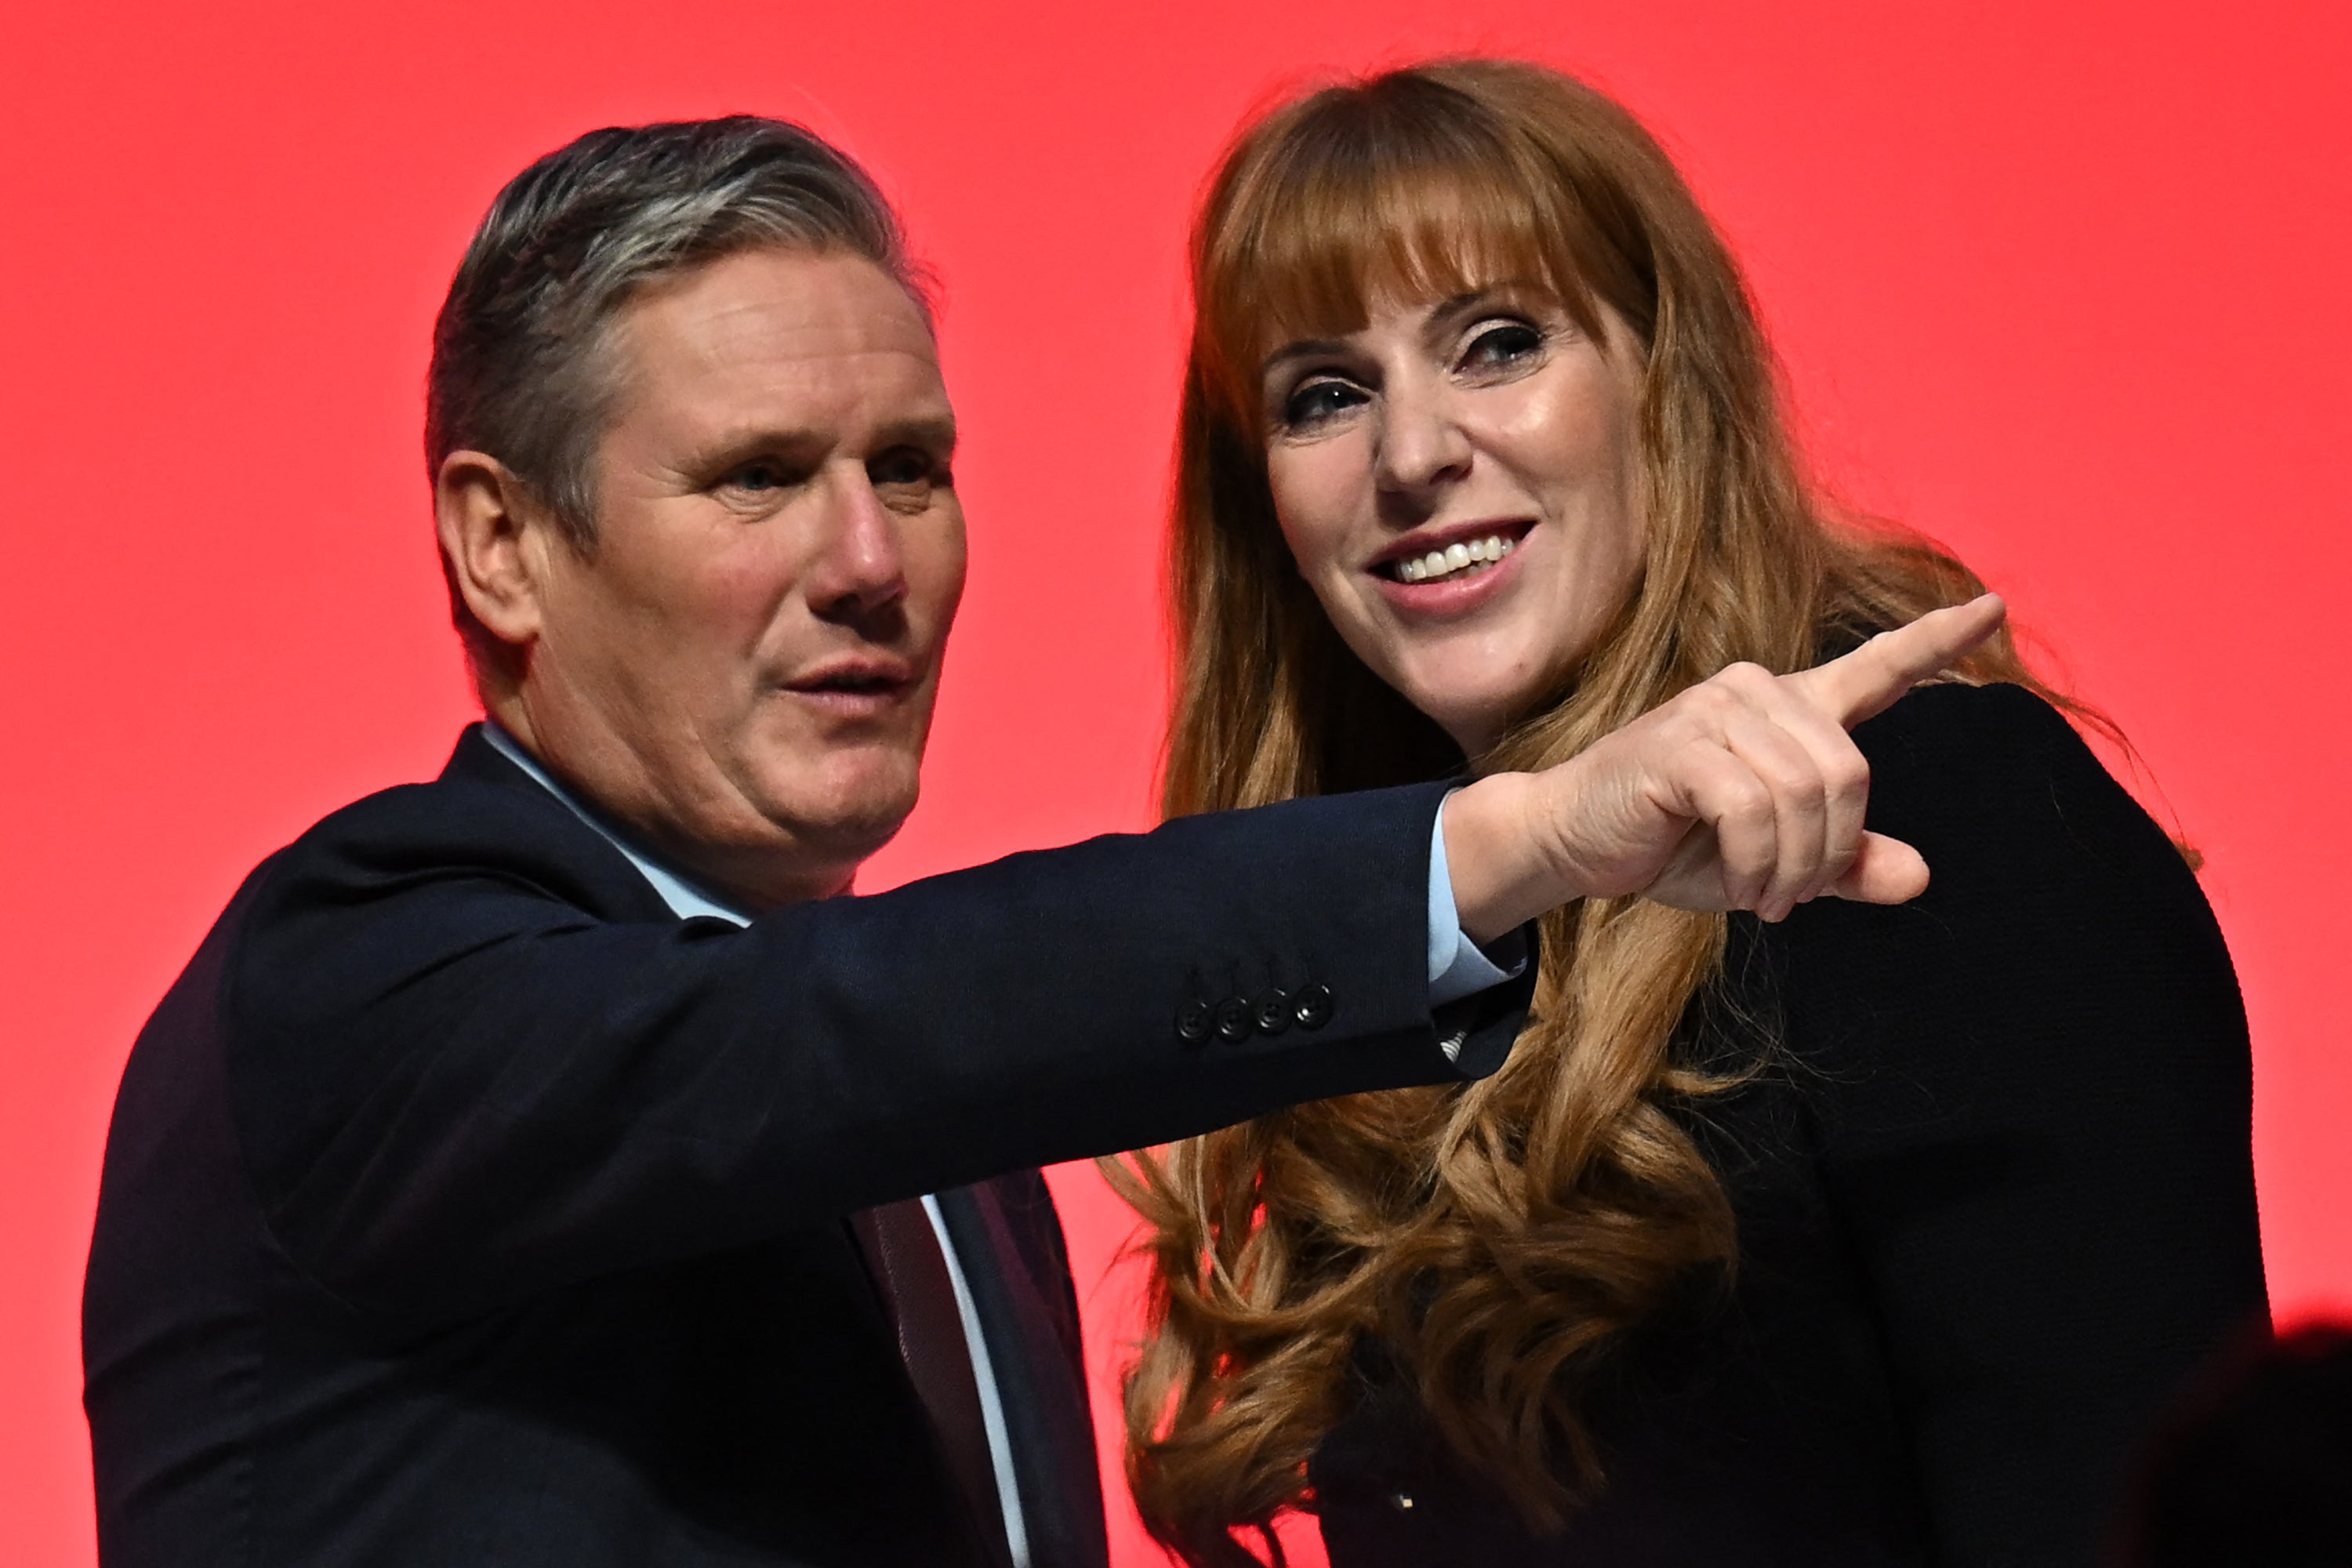 Keir Starmer and Deputy leader Angela Rayner at Labour conference